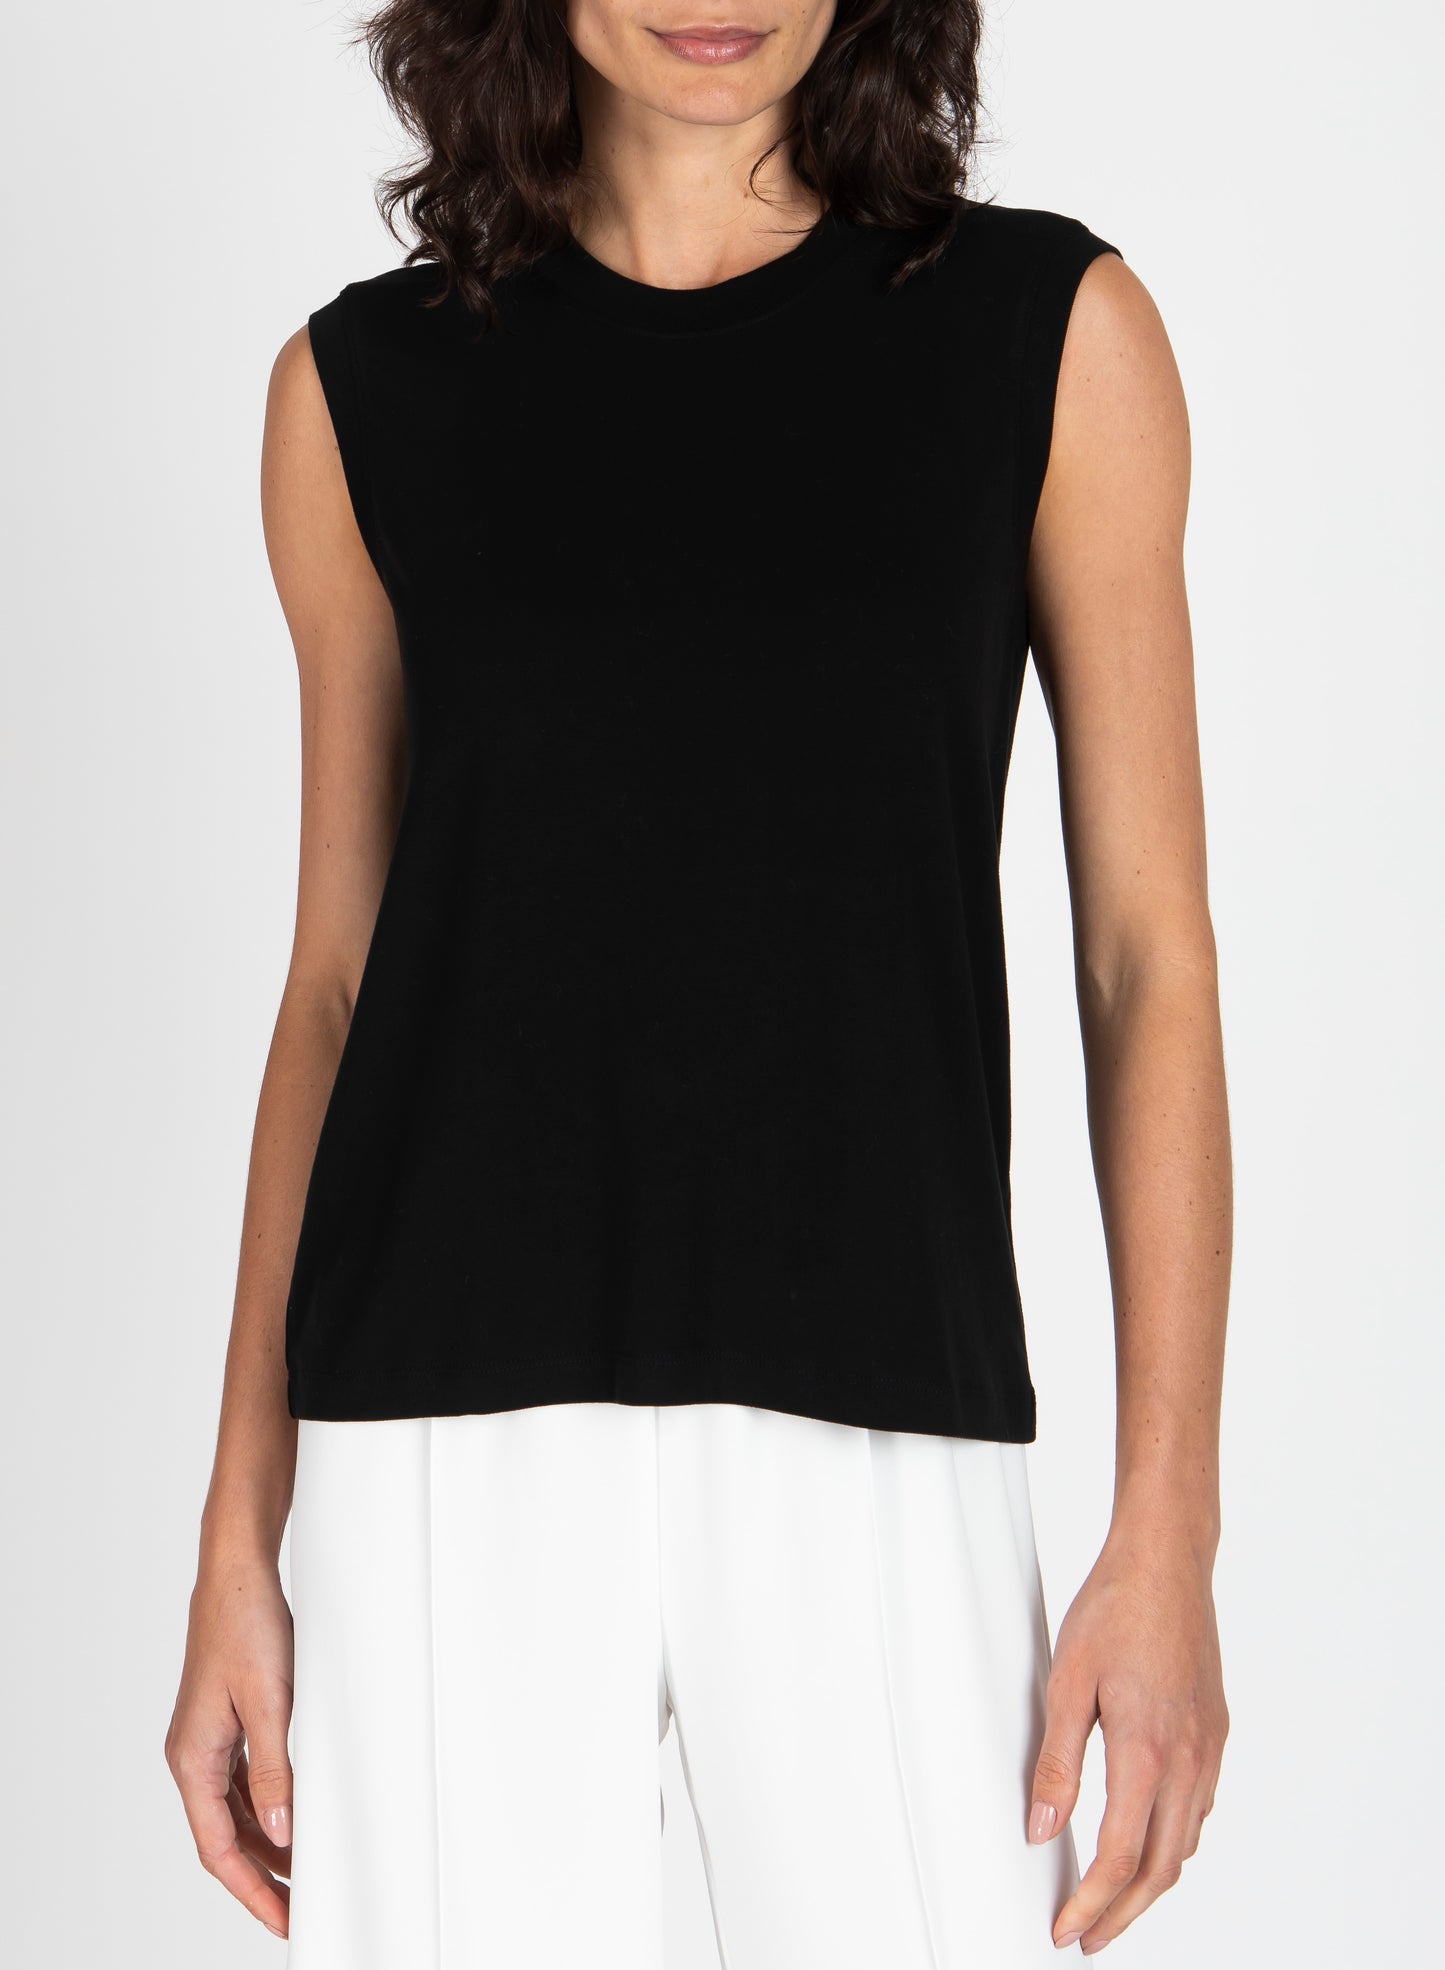 ATM Collection - Women - Black Sleeveless Muscle Tee